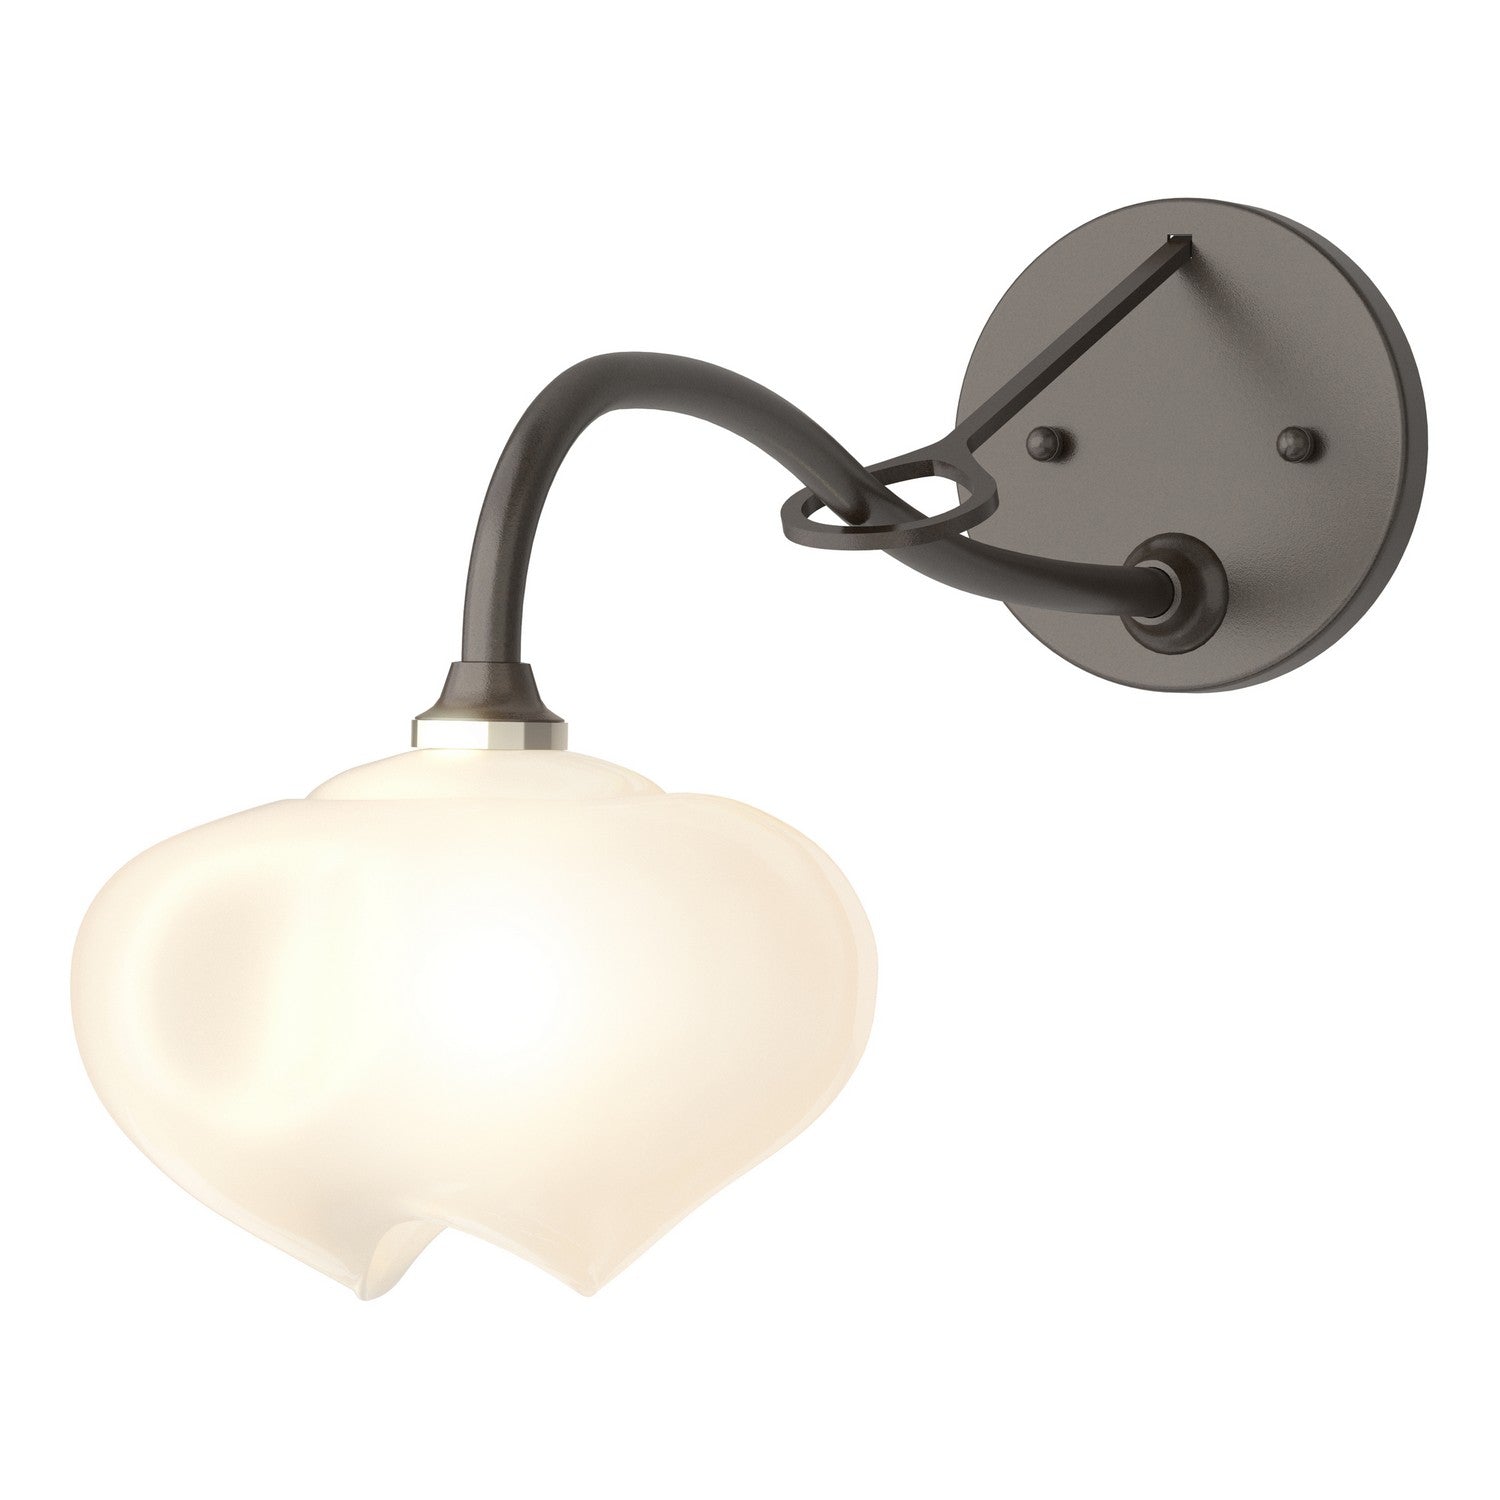 Hubbardton Forge - One Light Wall Sconce - Ume - Oil Rubbed Bronze- Union Lighting Luminaires Decor